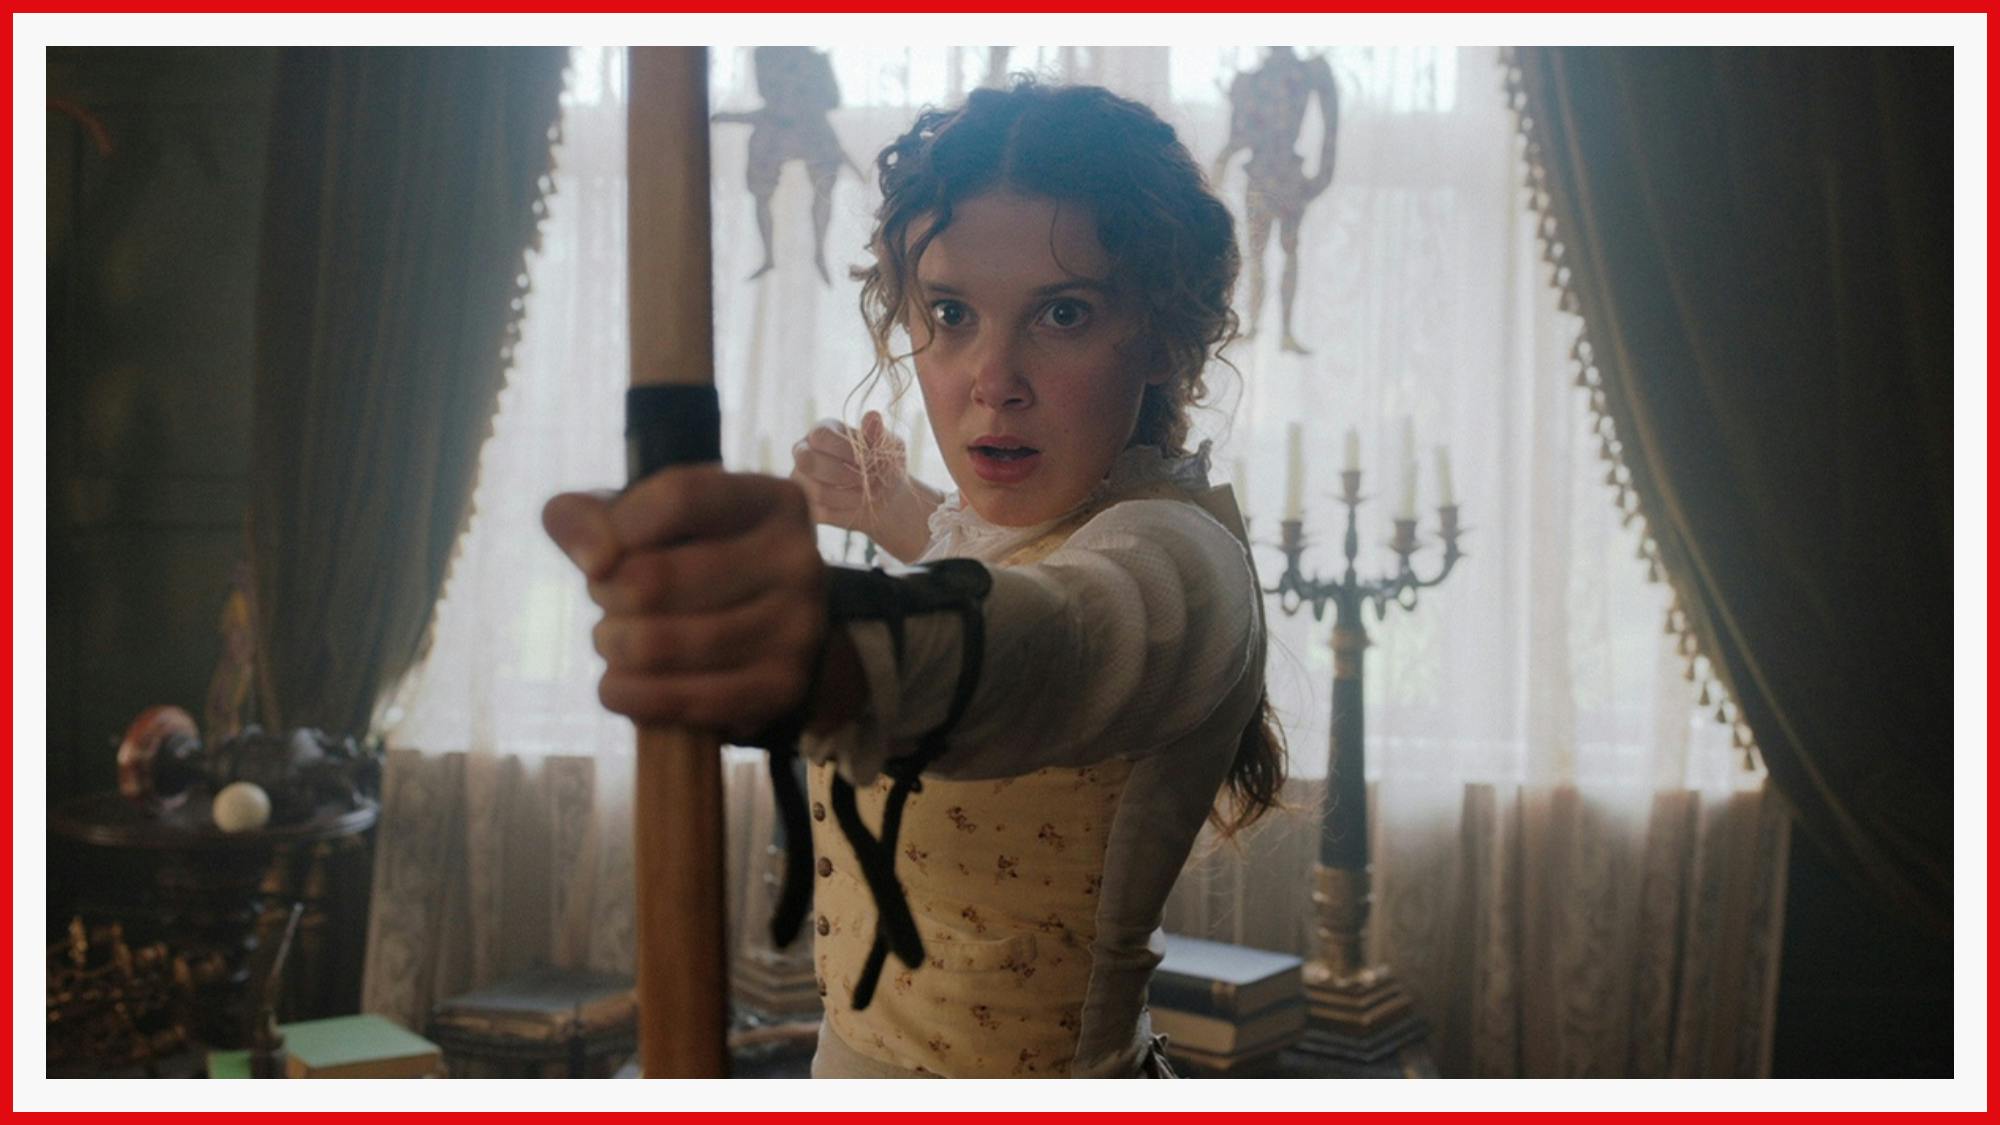 Millie Bobby Brown is prepared for a fight as Enola Holmes. Here, she holds a bow and arrow at the ready.